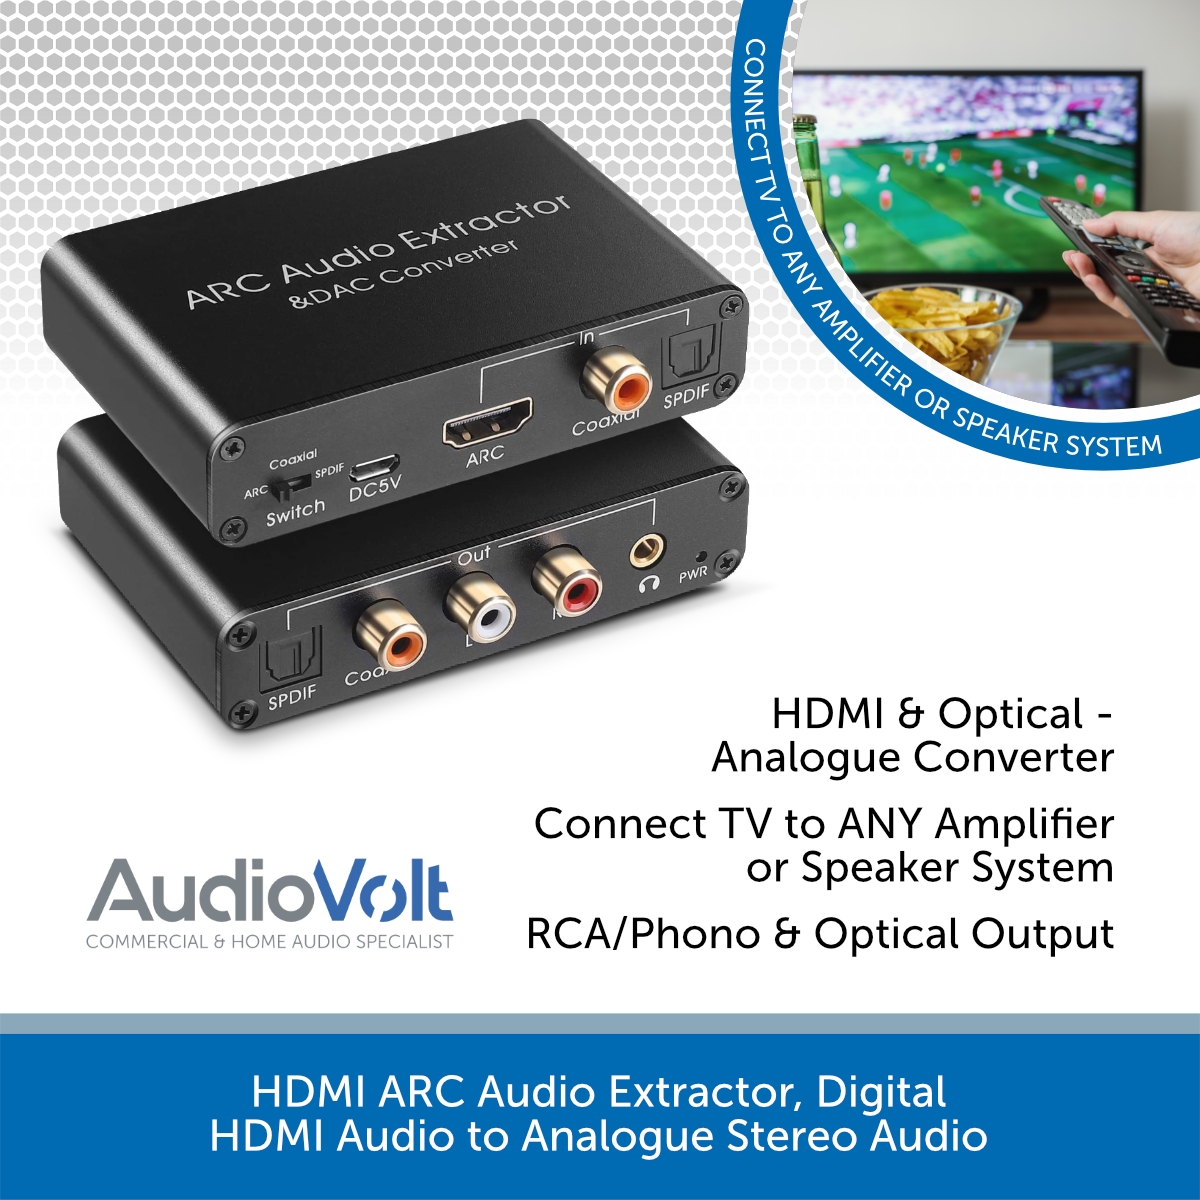 How to Connect Speakers to TV? HDMI ARC or HDMI Audio Extractor